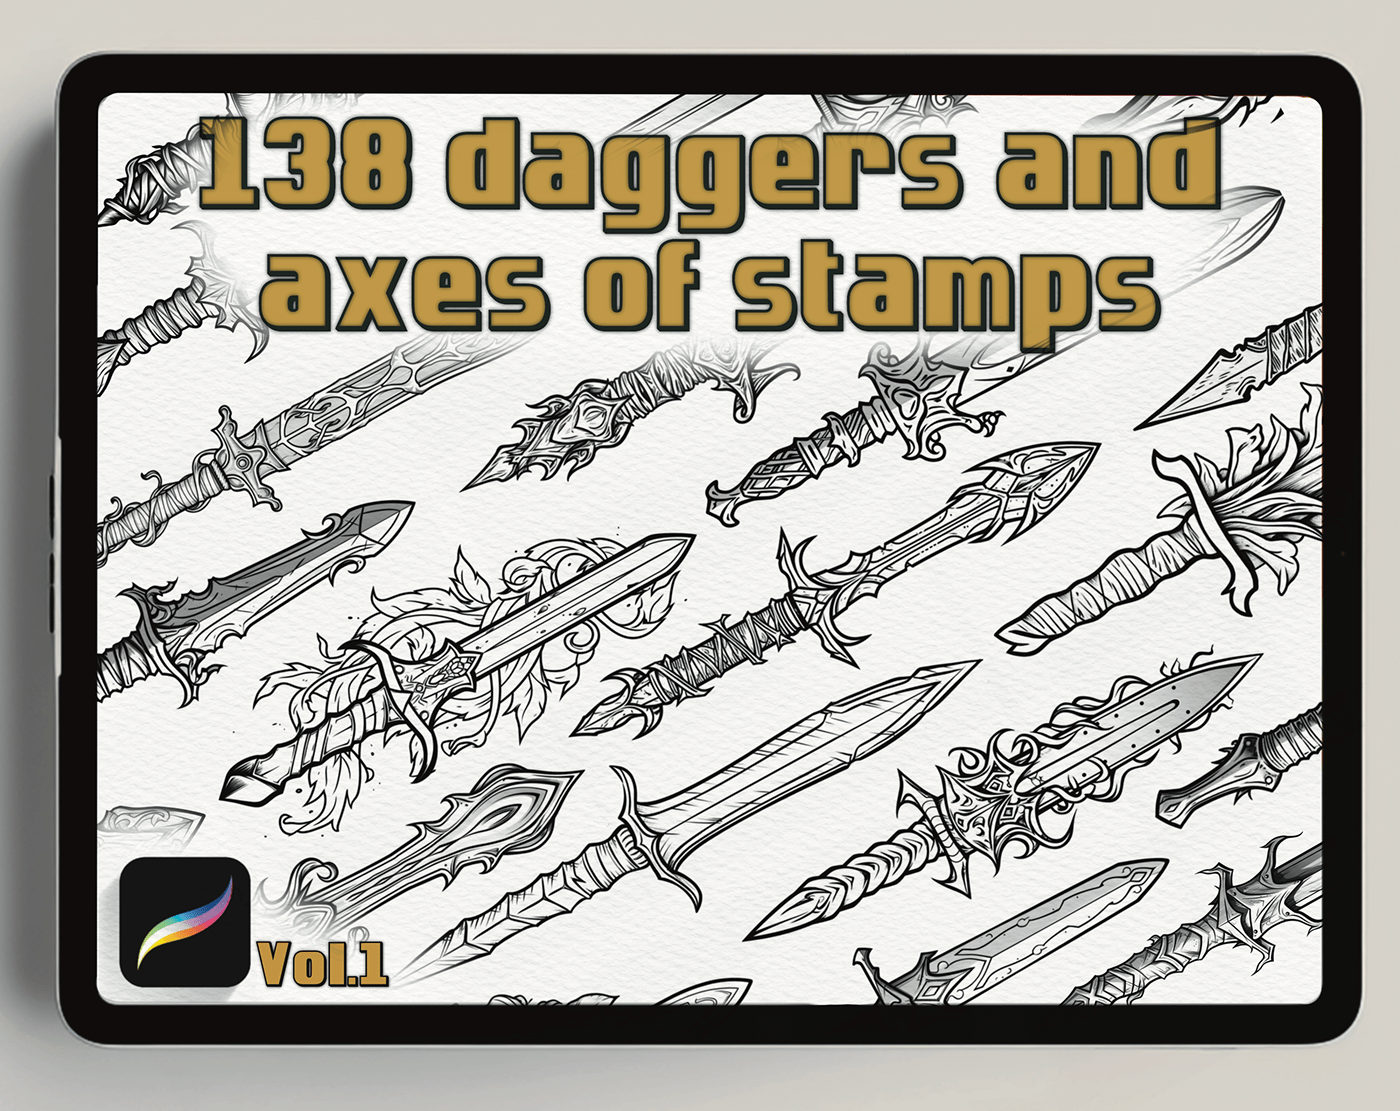 daggers fantasy digitalart artistictools creativeprojects digitalproduct procreatestampcollection Stampcollection stampssale tattoodesigns